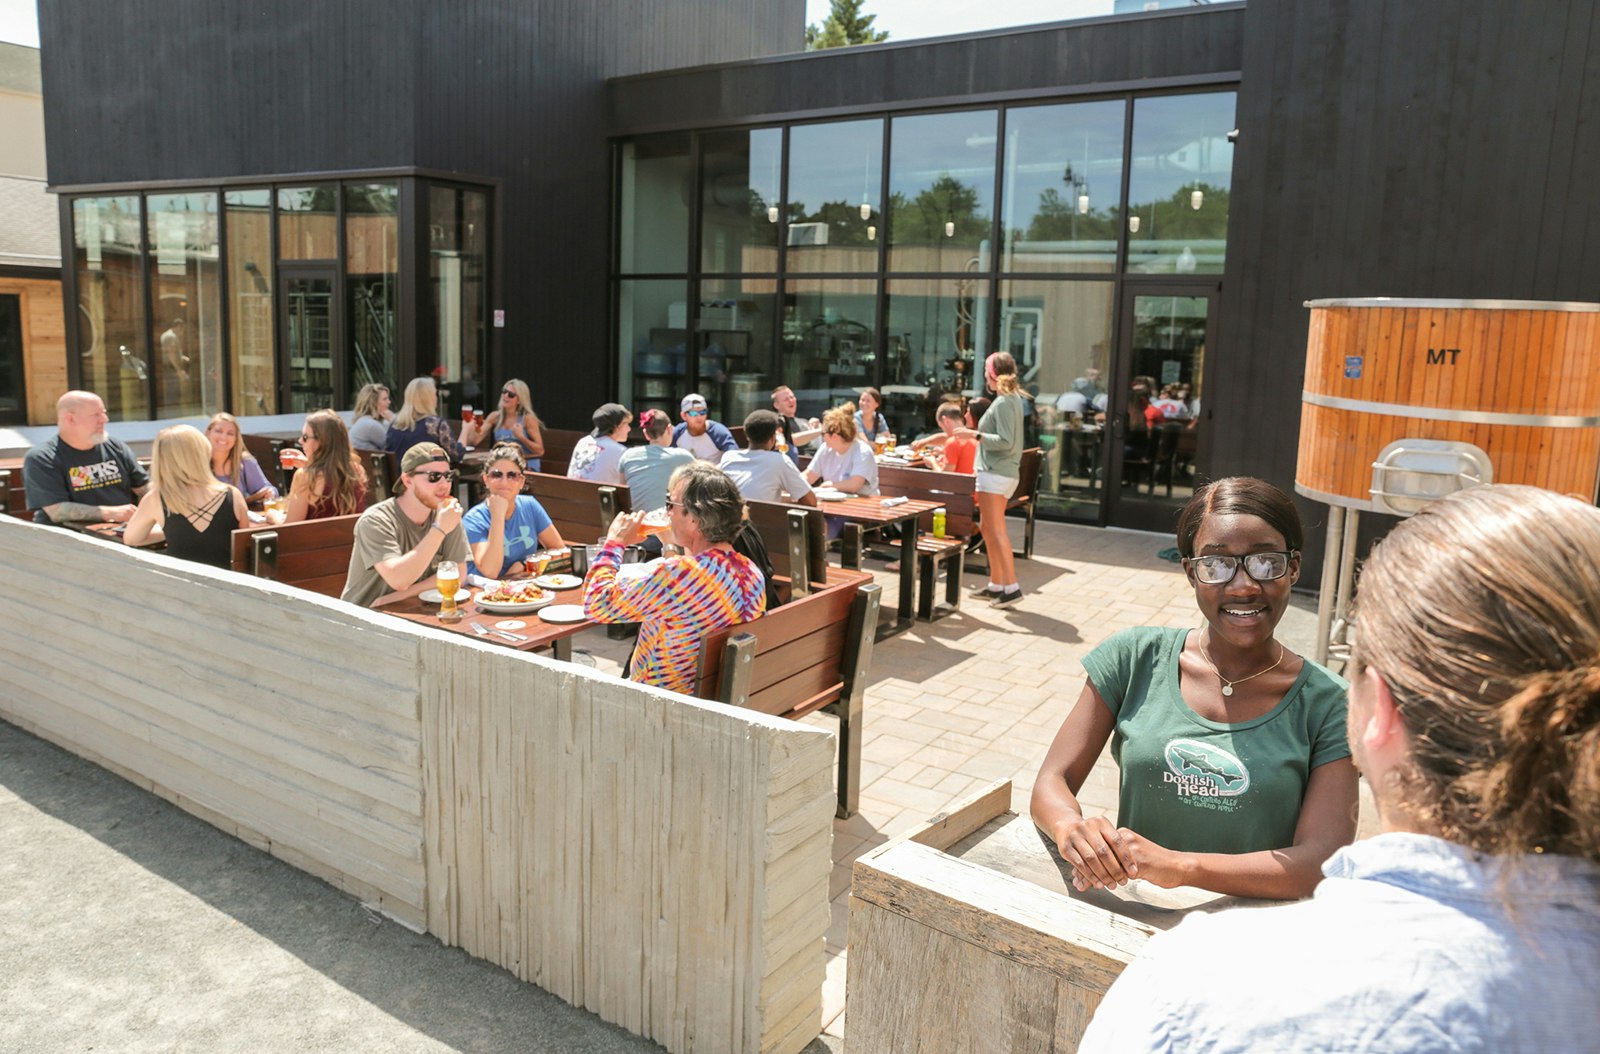 Hostess checks in a guest at Dogfish Brewing in Delaware, with a modern, concrete patio full of people in the background. Many craft breweries in the US now feature outdoor patio spaces. 